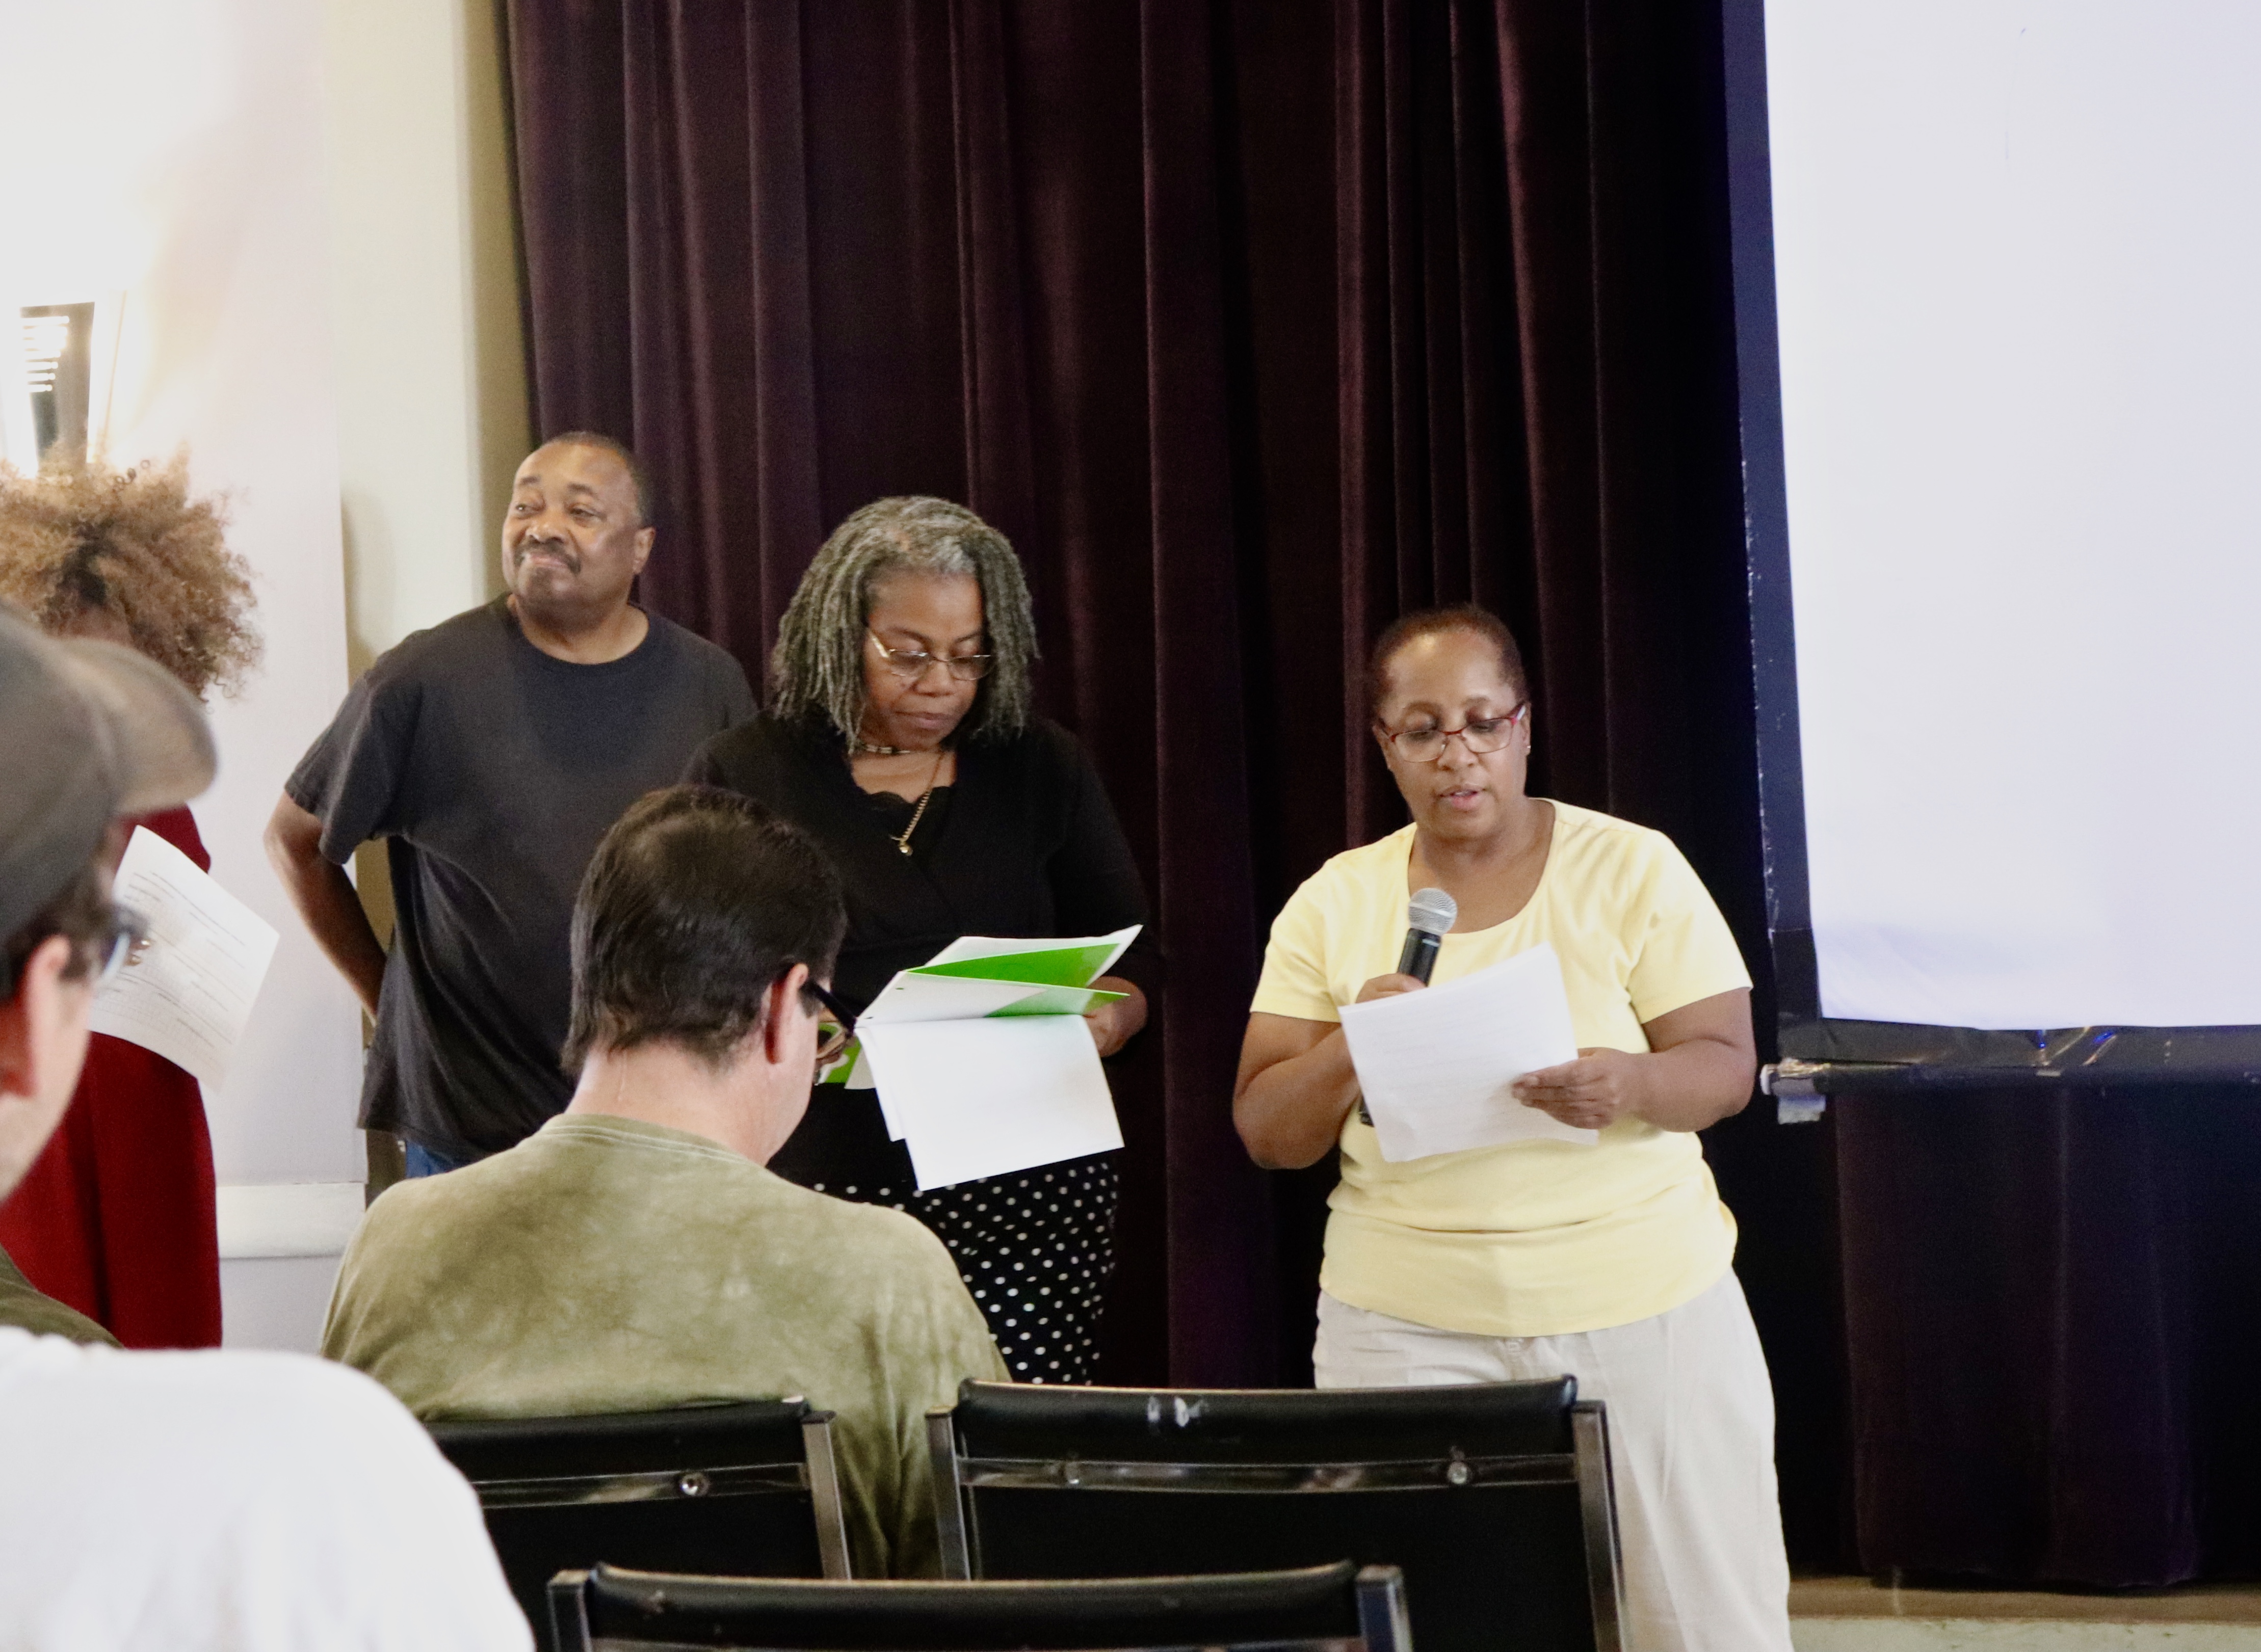 (Left to right) Marvin Martin, Angela Williams-Mitchell and Alma Chislom shared their experiences and ideas with residents at the Boston People's Plan Assembly, Sat. 22 in Field's Corner. Photo by Eileen O'Grady.